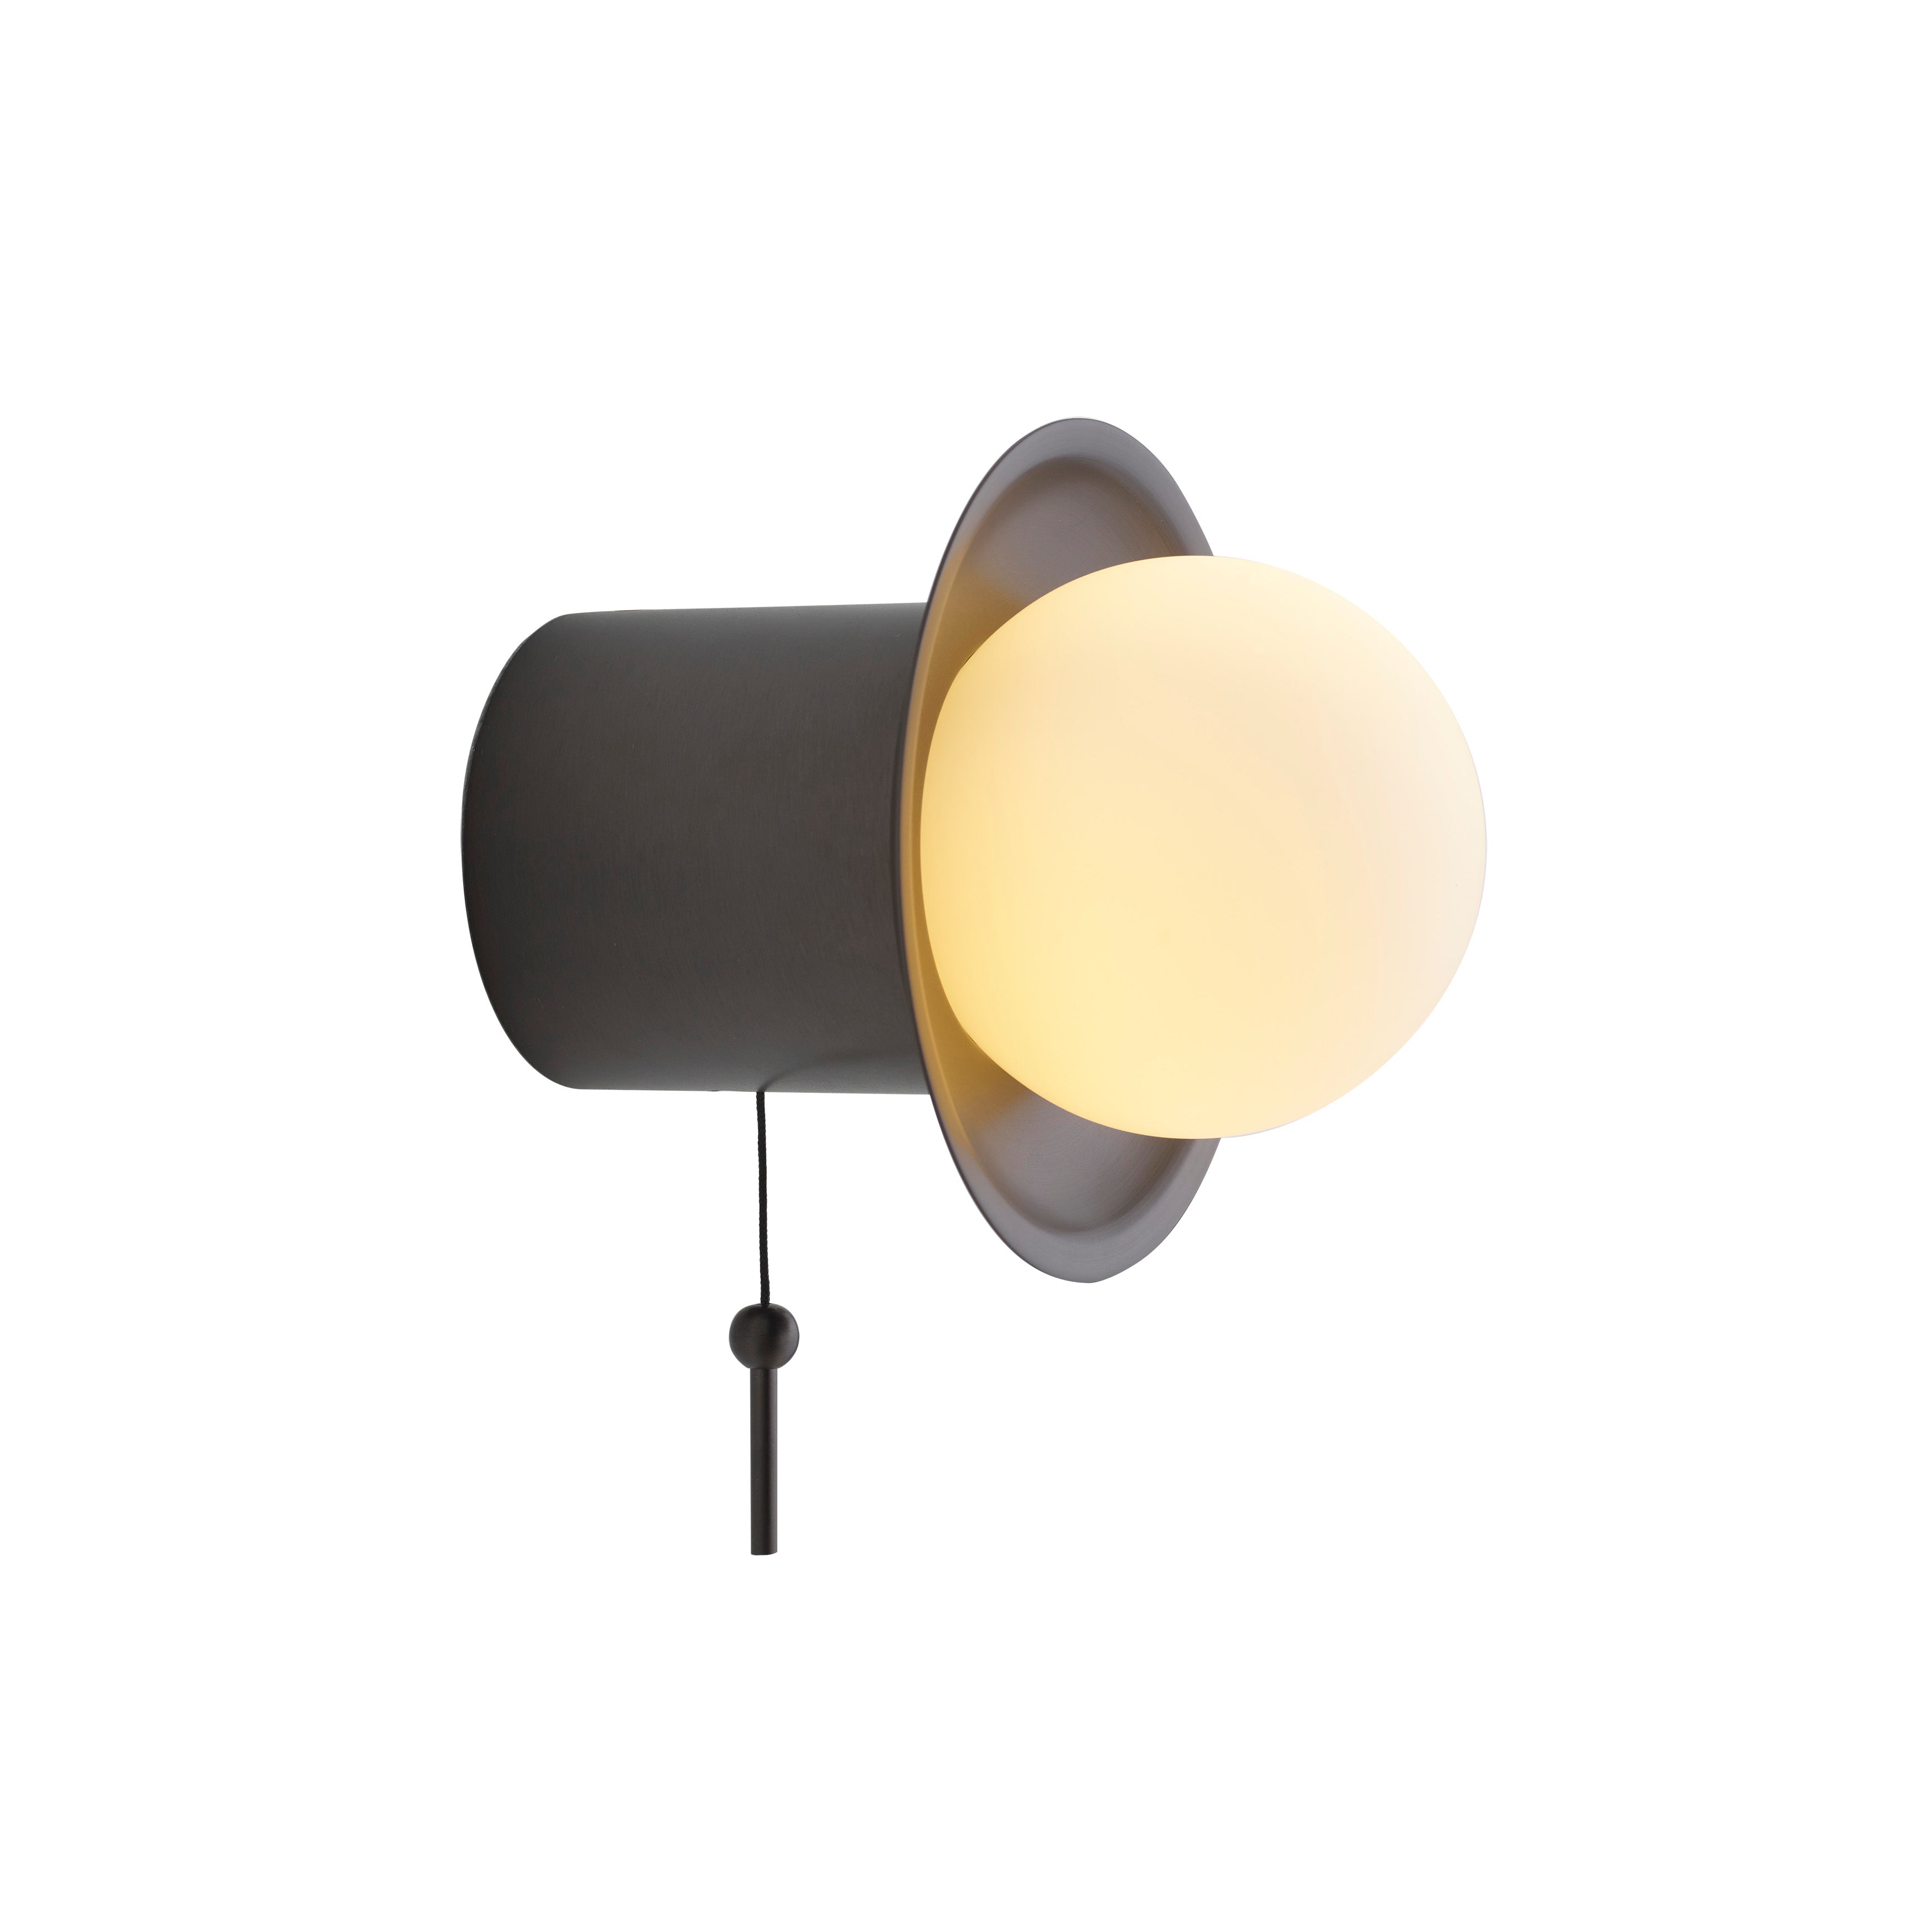 Janed Wall Light with Cord: Satin Graphite + Satin Graphite